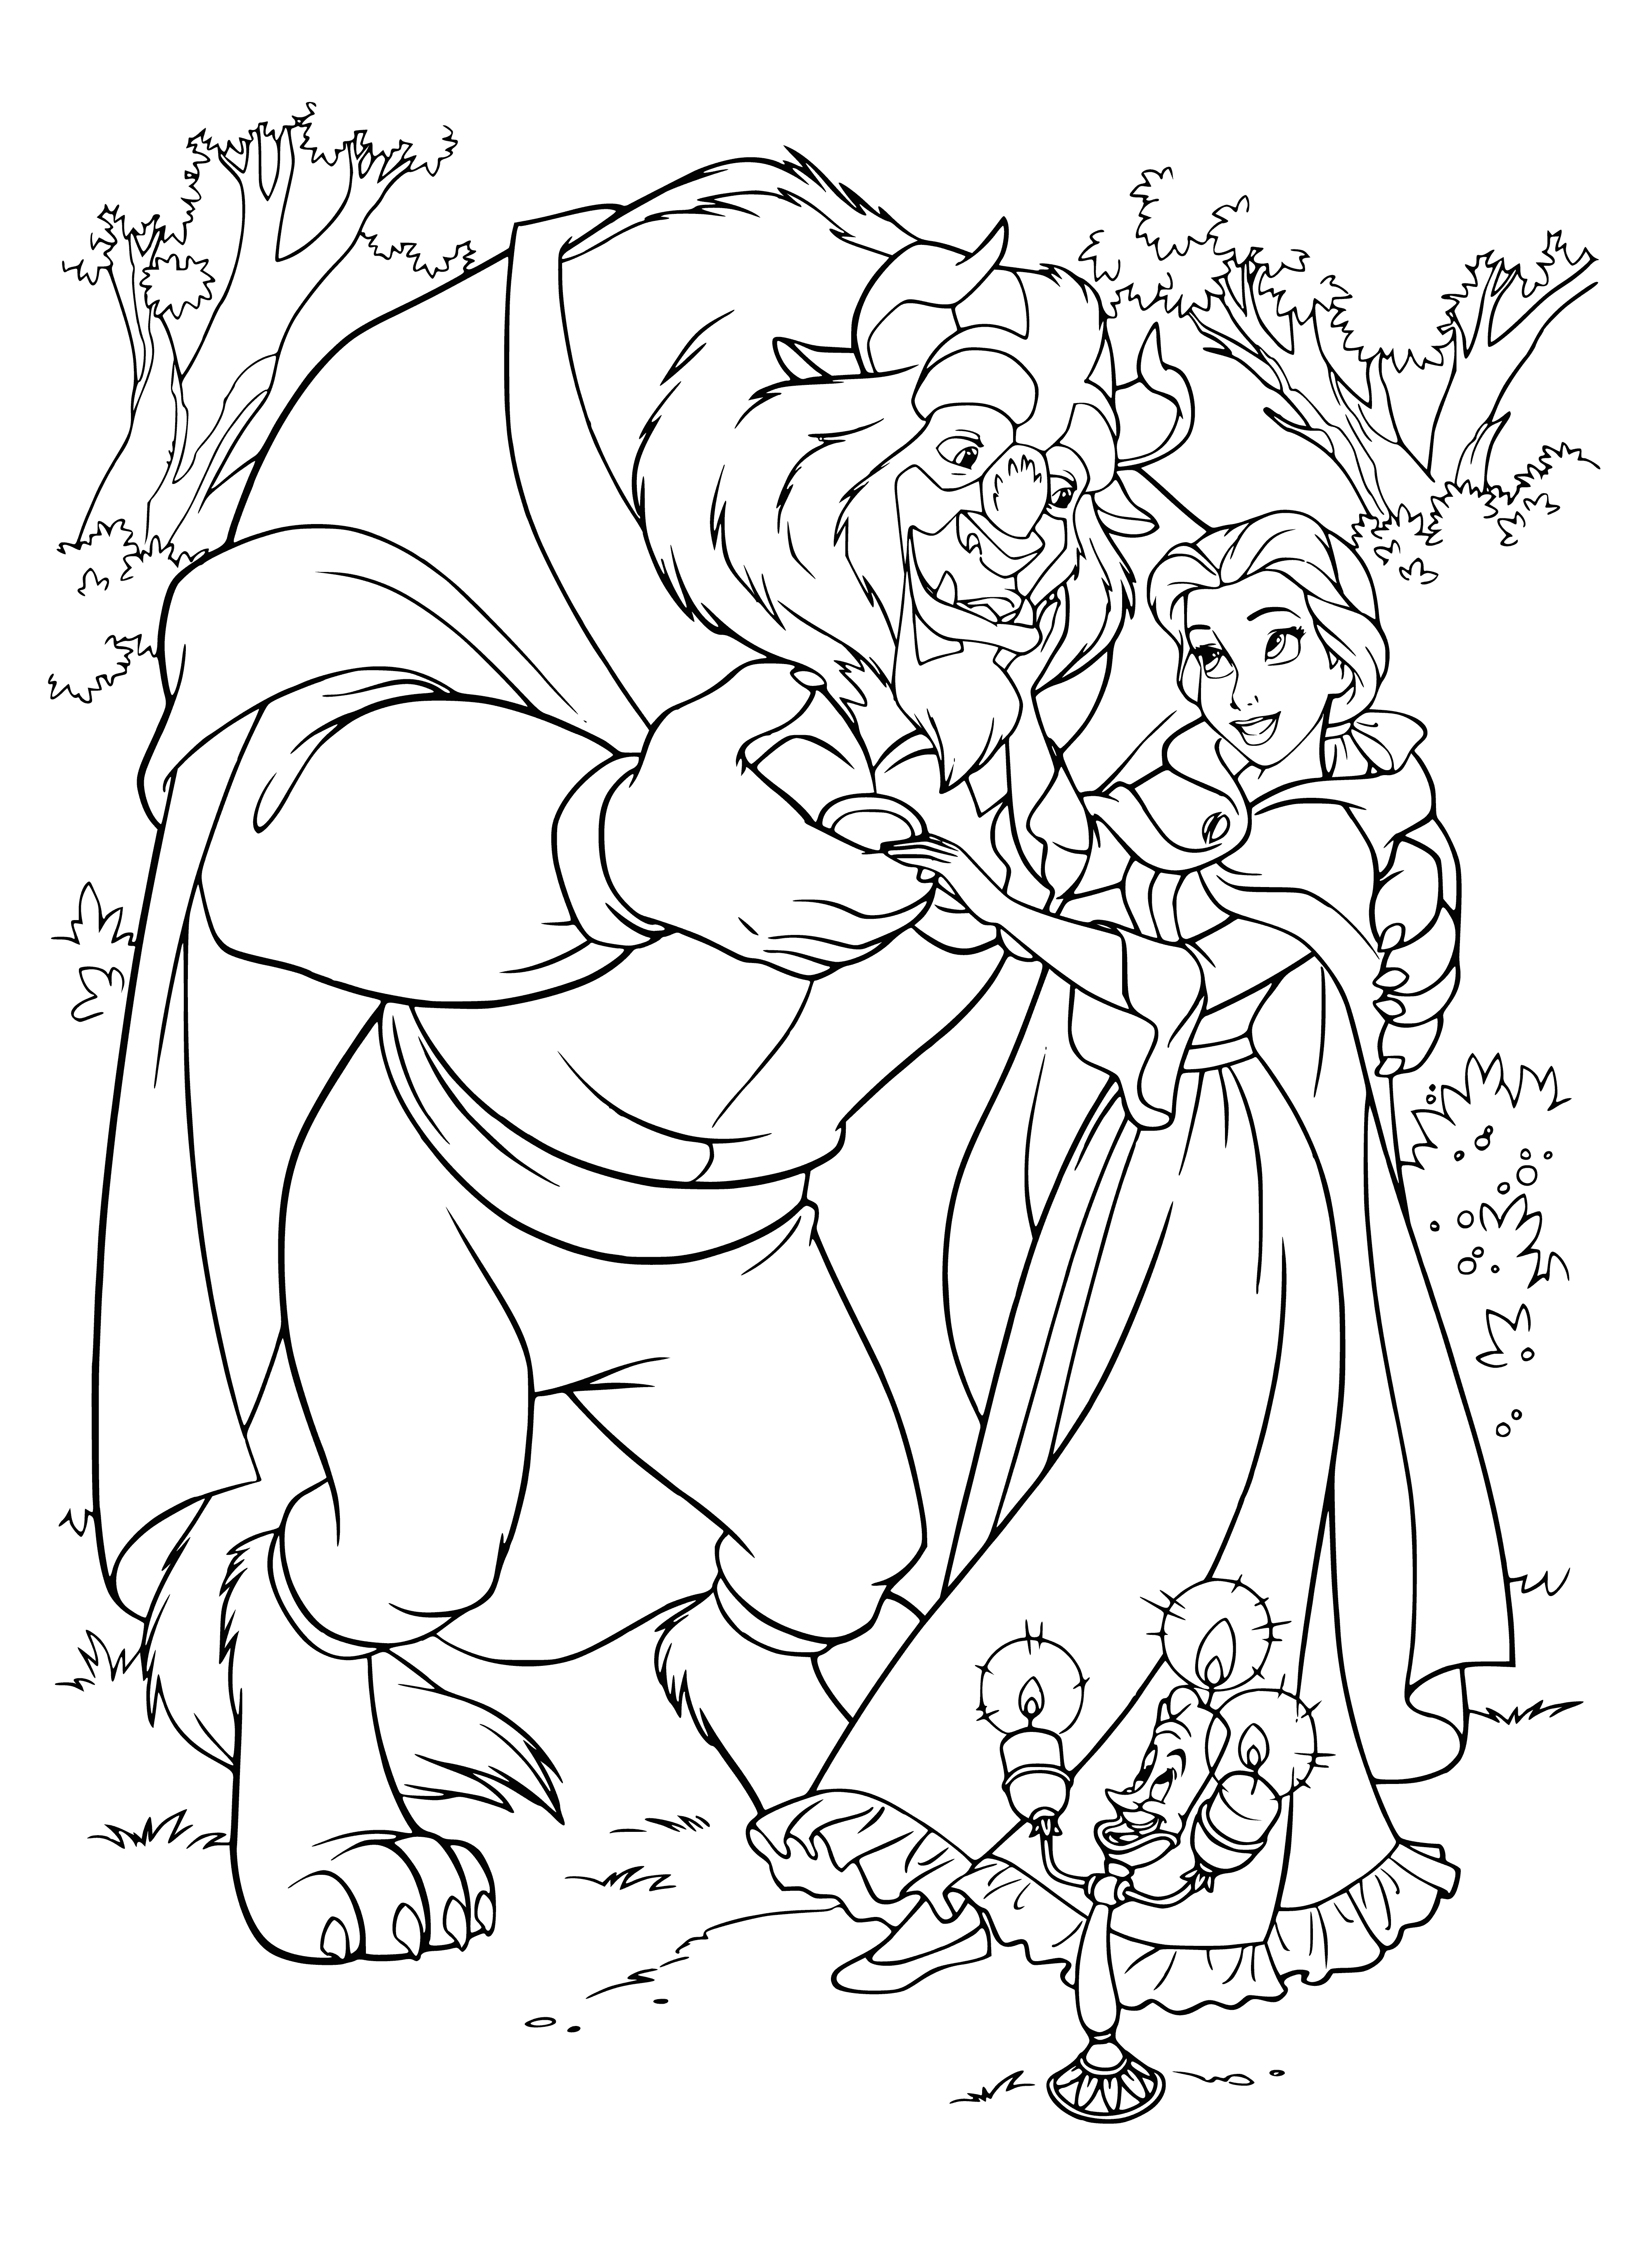 The Beast and Belle are dancing coloring page